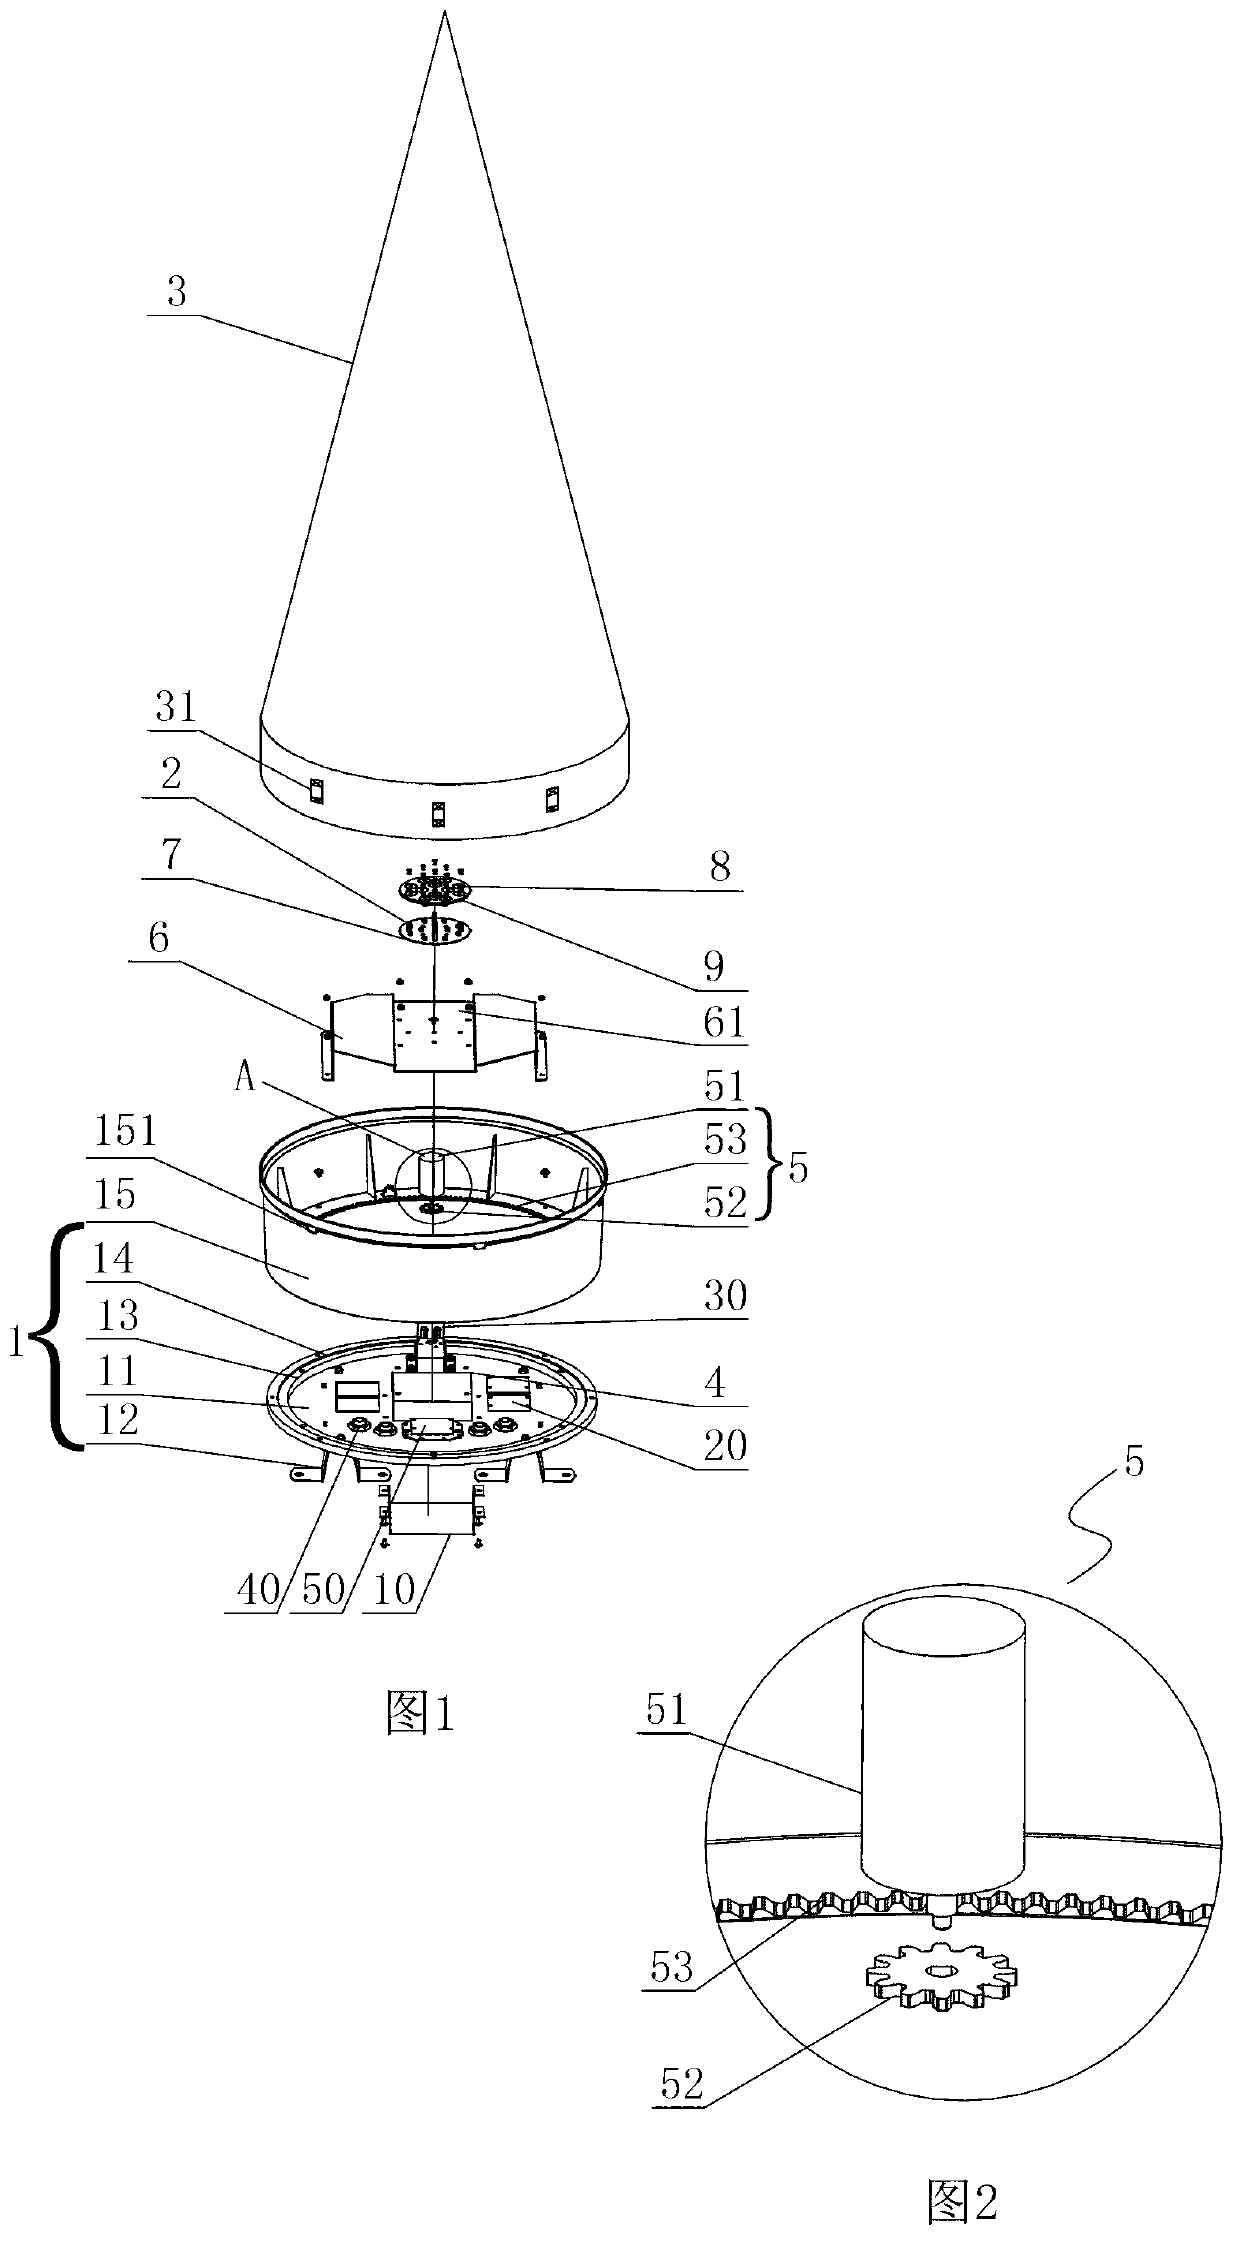 Decorative landscape lamp capable of rotating